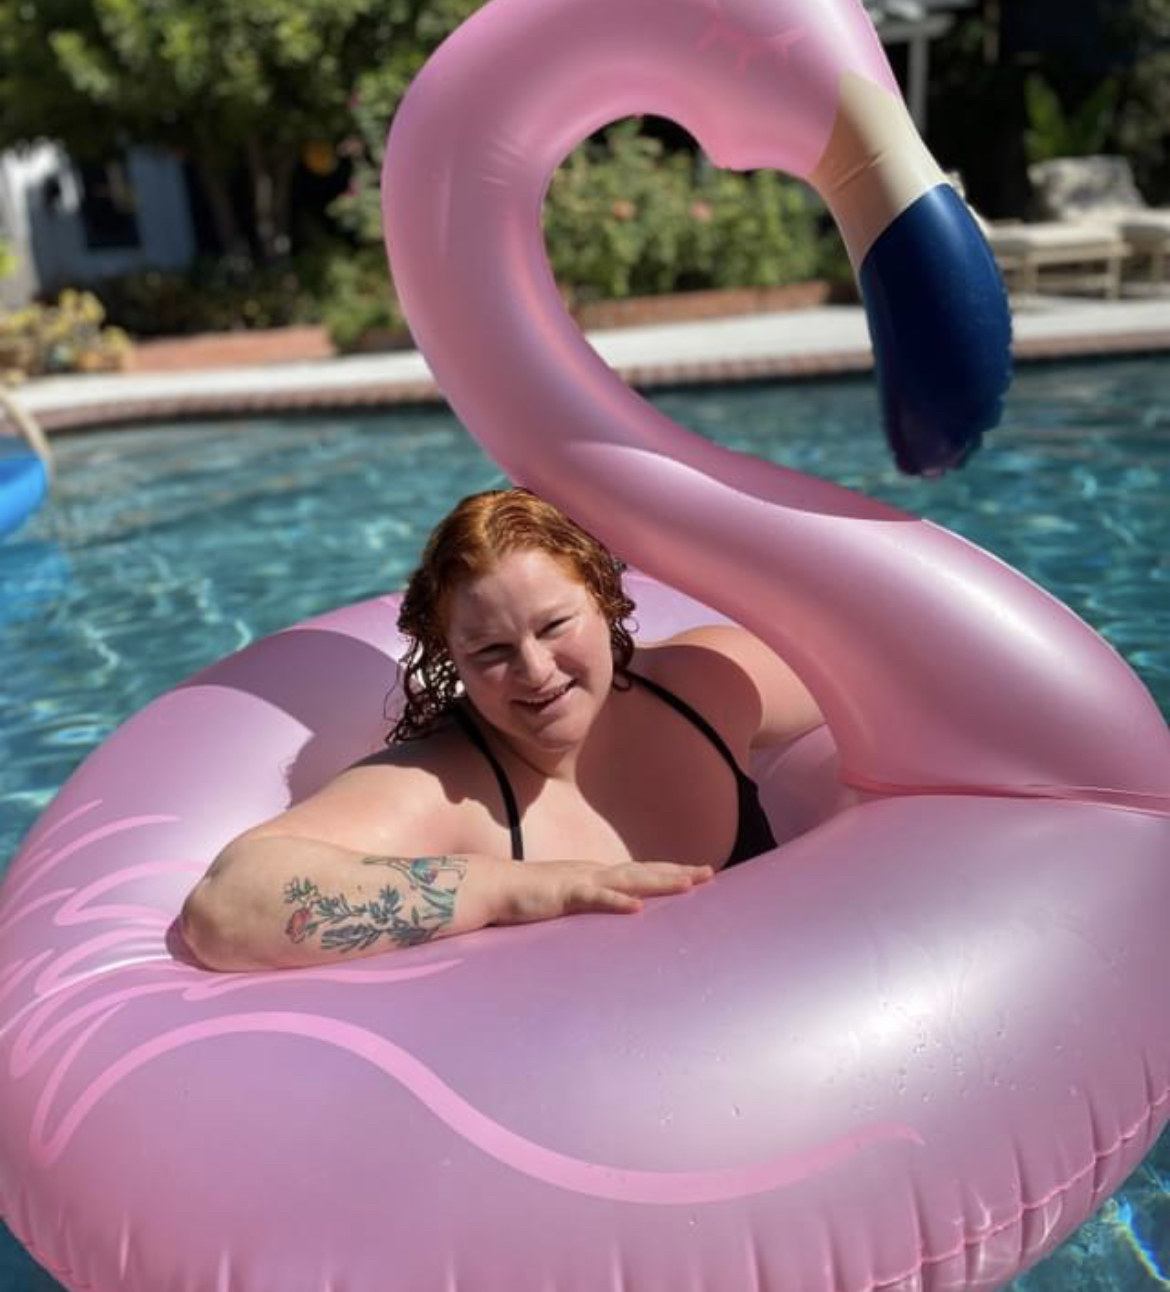 Erica lounging in a pool with a cute flamingo floatie